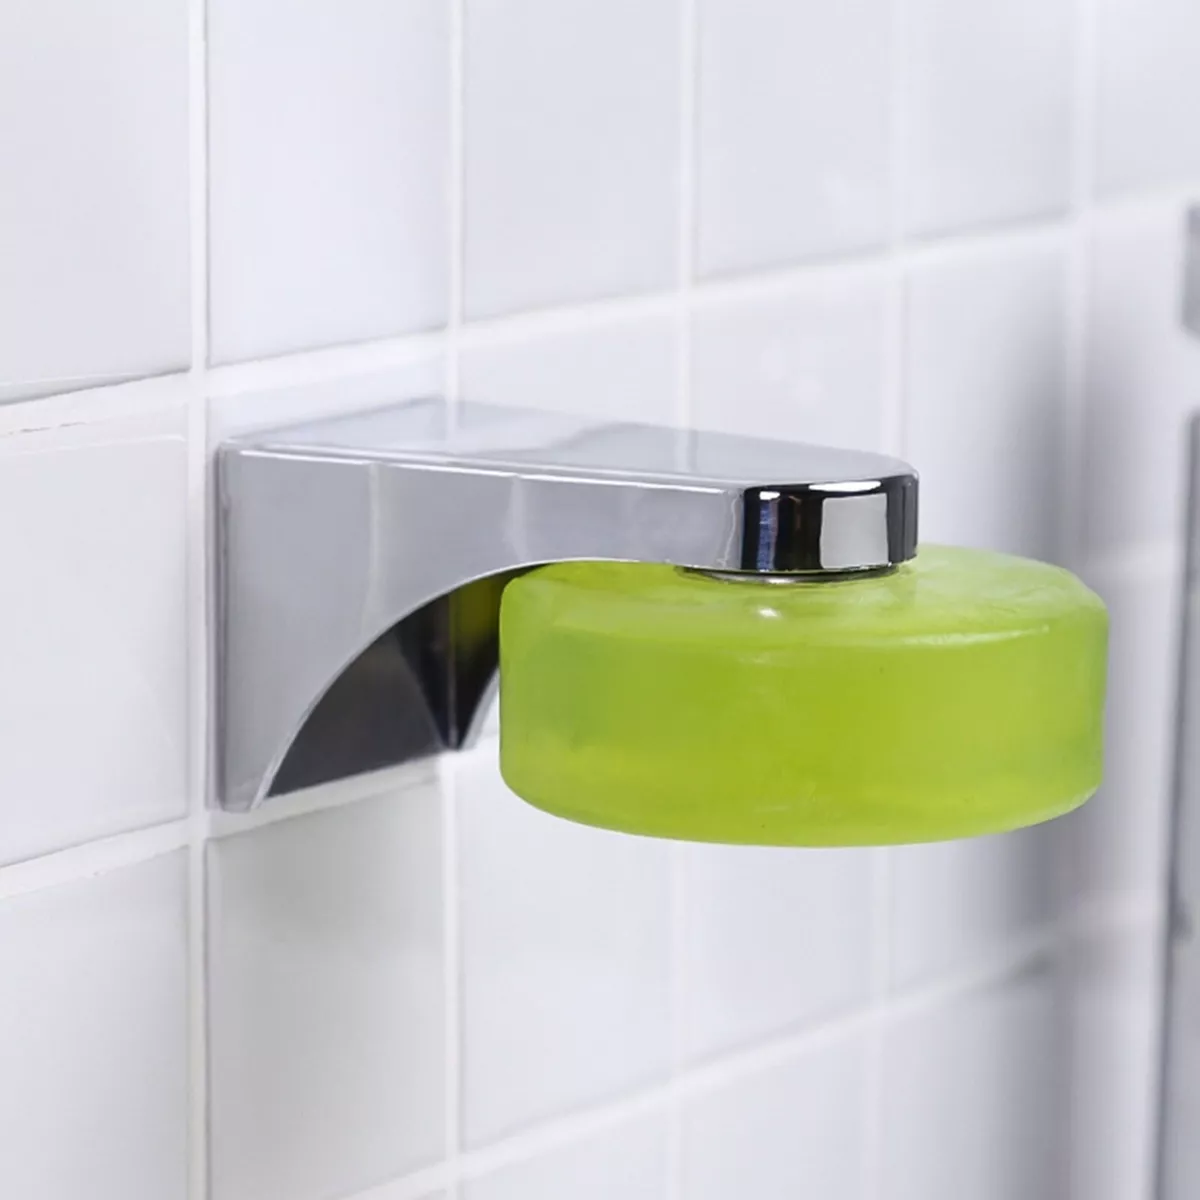 Self-Adhesive Soap Holder Bathroom Magnet Water Wall Hanging